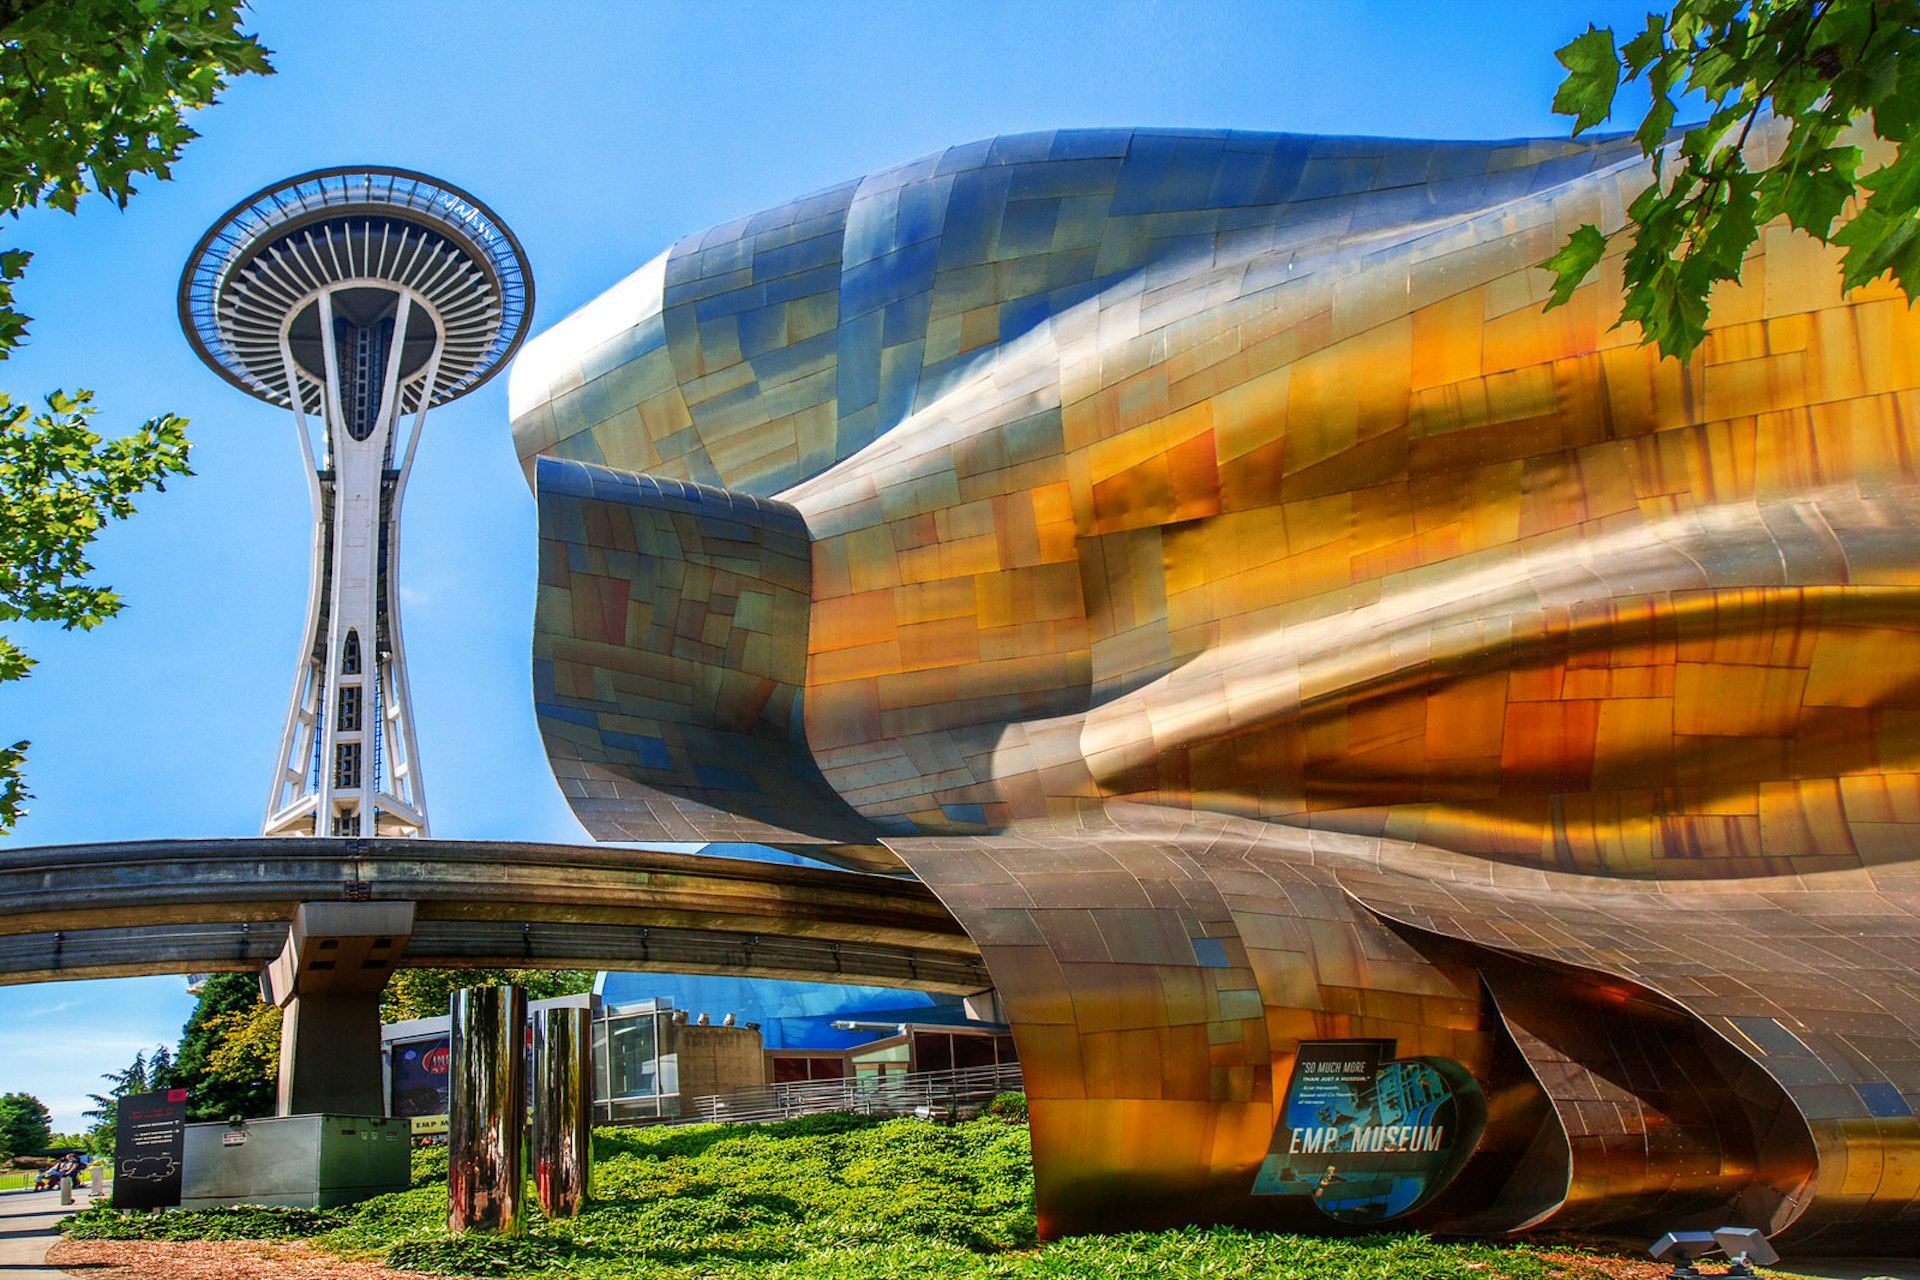 EMP Museum Building, Seattle © Artie Photography (Artie Ng) / Getty Images